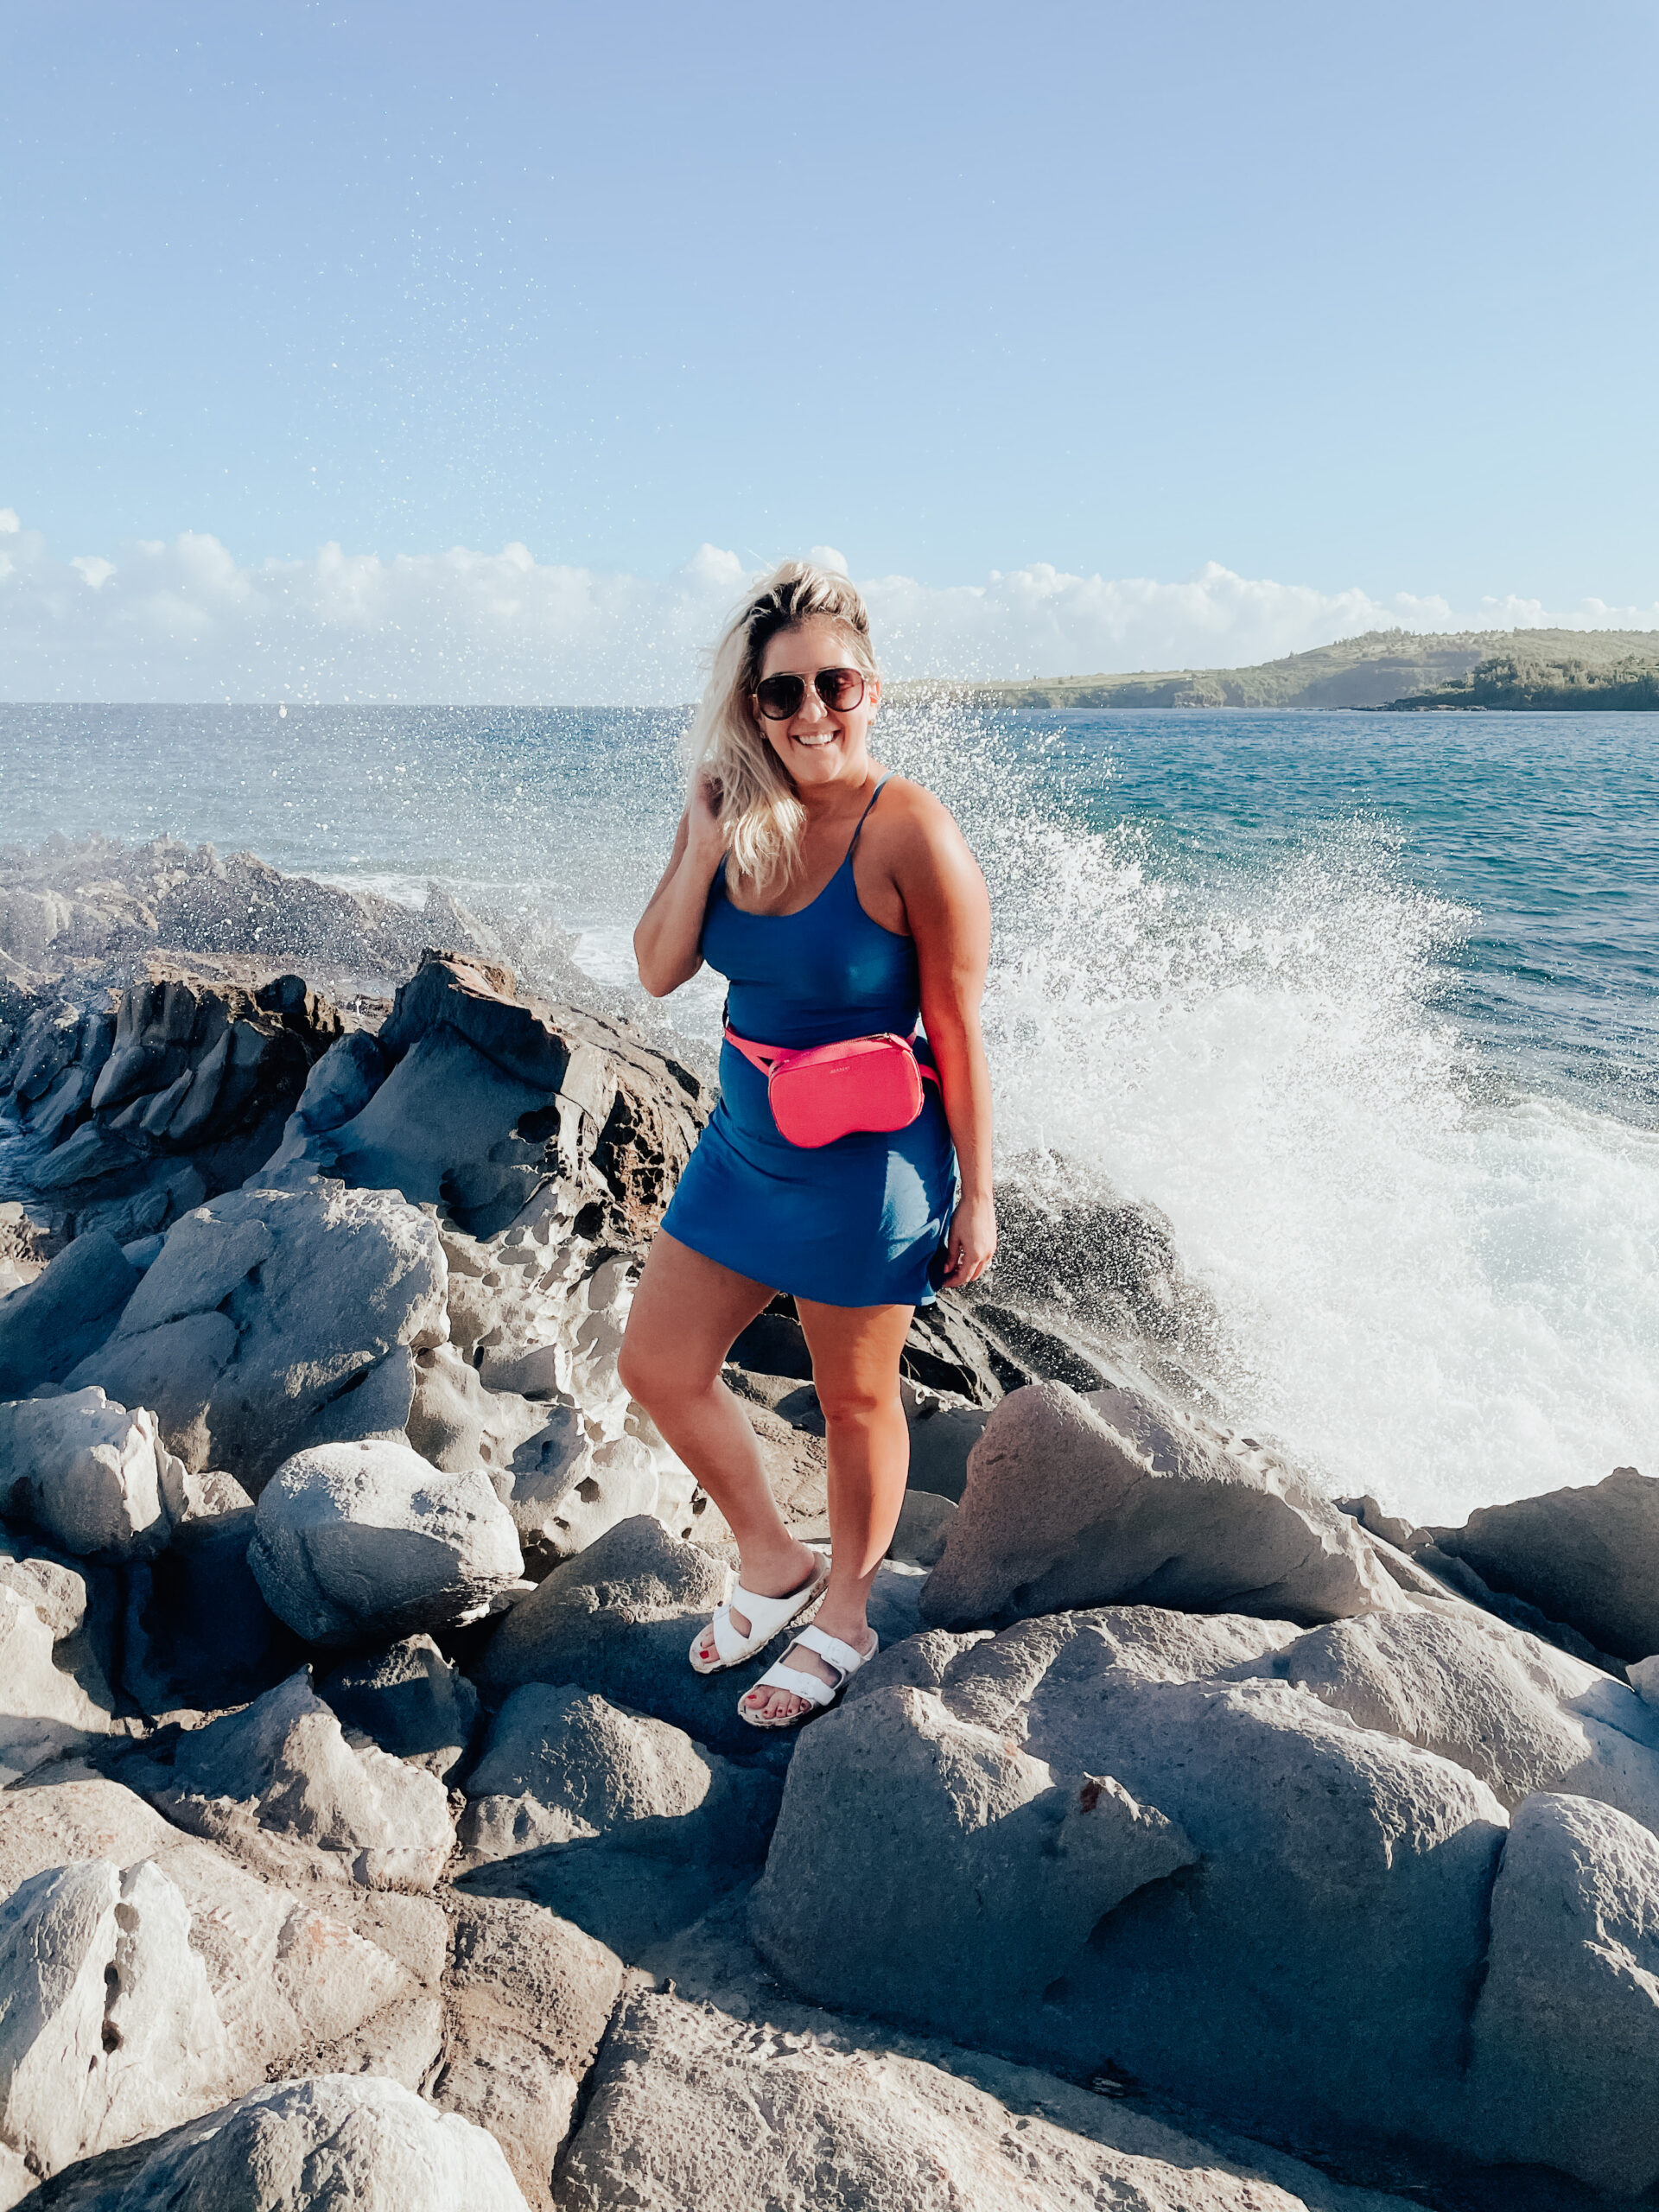 Fashion blogger KatWalkSF at the Ritz Maui in an Exercise Dress by Outdoor Voices